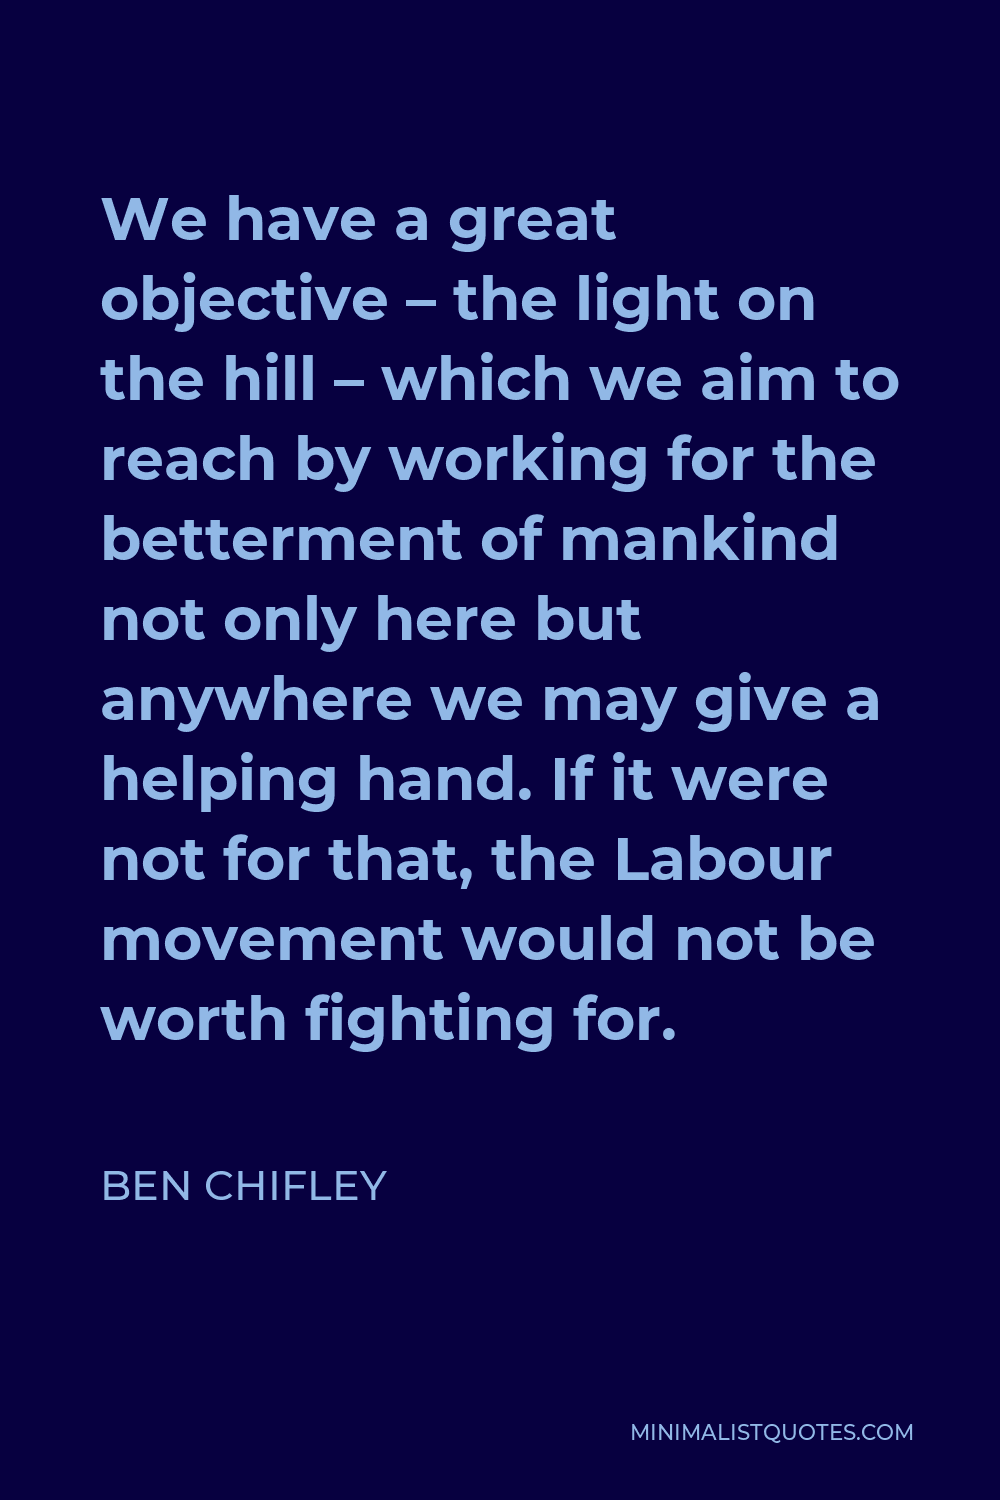 Ben Chifley Quote - We have a great objective – the light on the hill – which we aim to reach by working for the betterment of mankind not only here but anywhere we may give a helping hand. If it were not for that, the Labour movement would not be worth fighting for.